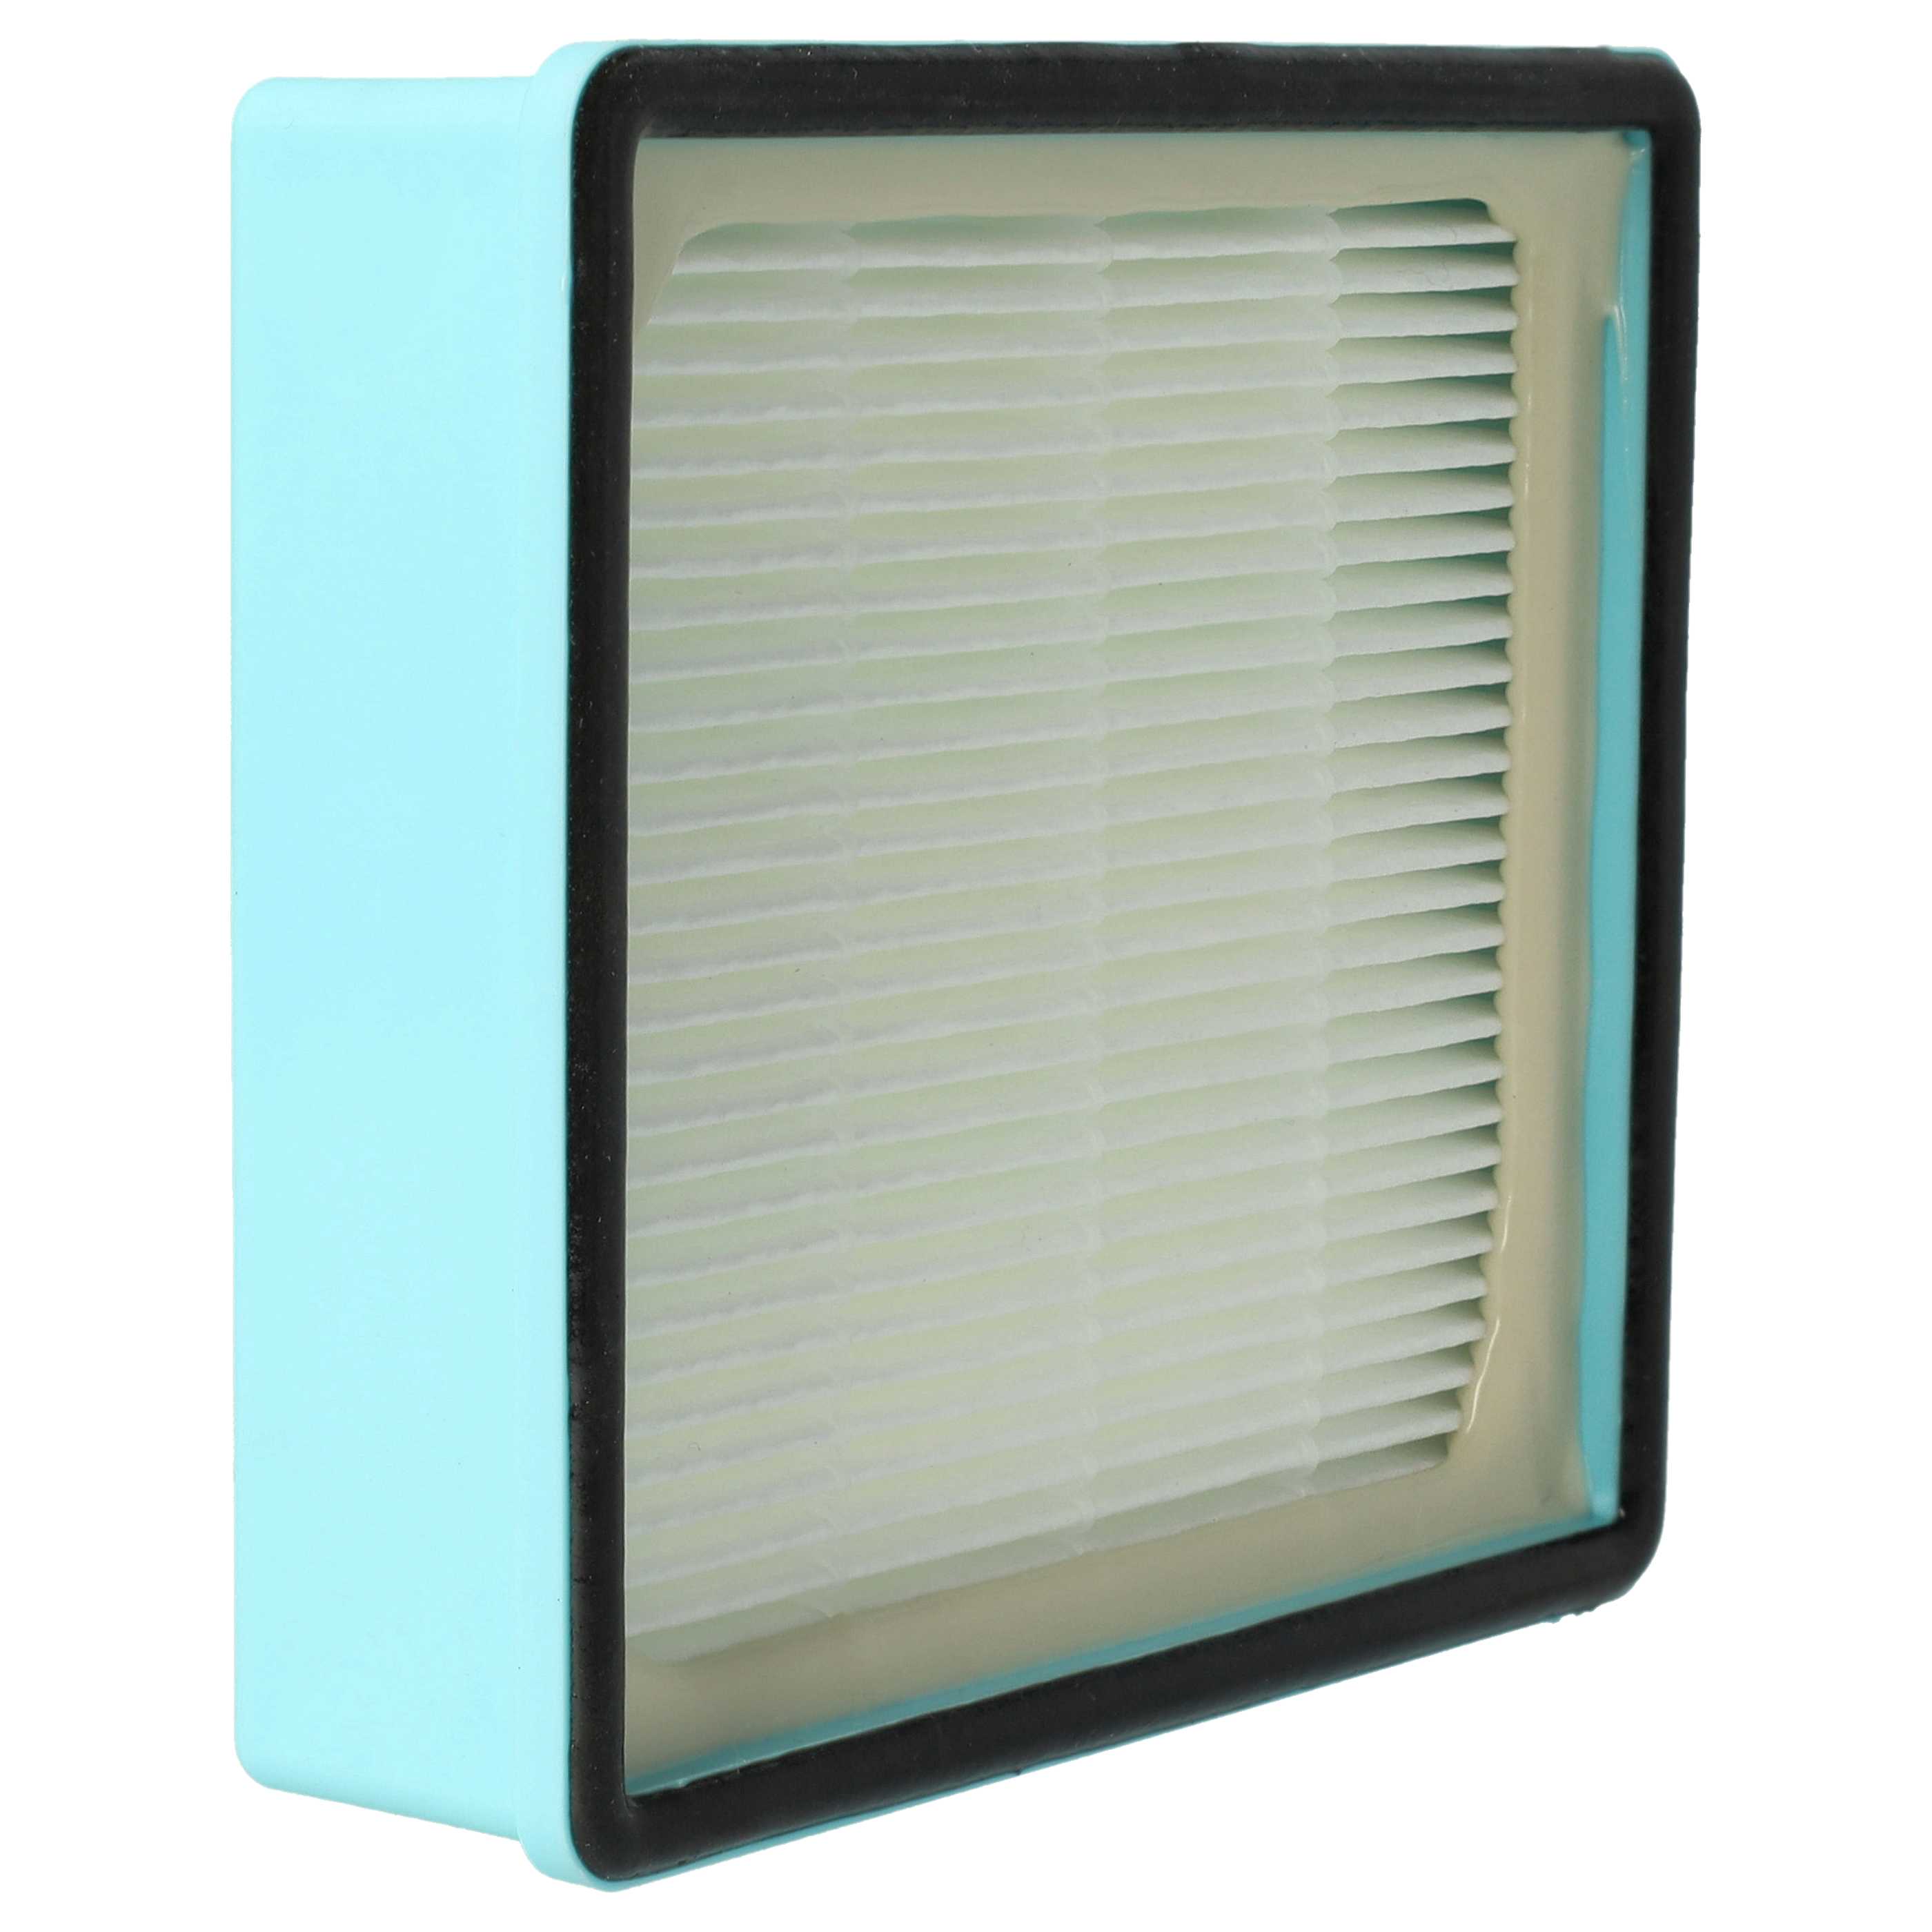 1x HEPA filter replaces Philips CRP495, CP0259/01, 432200493941 for Philips Vacuum Cleaner